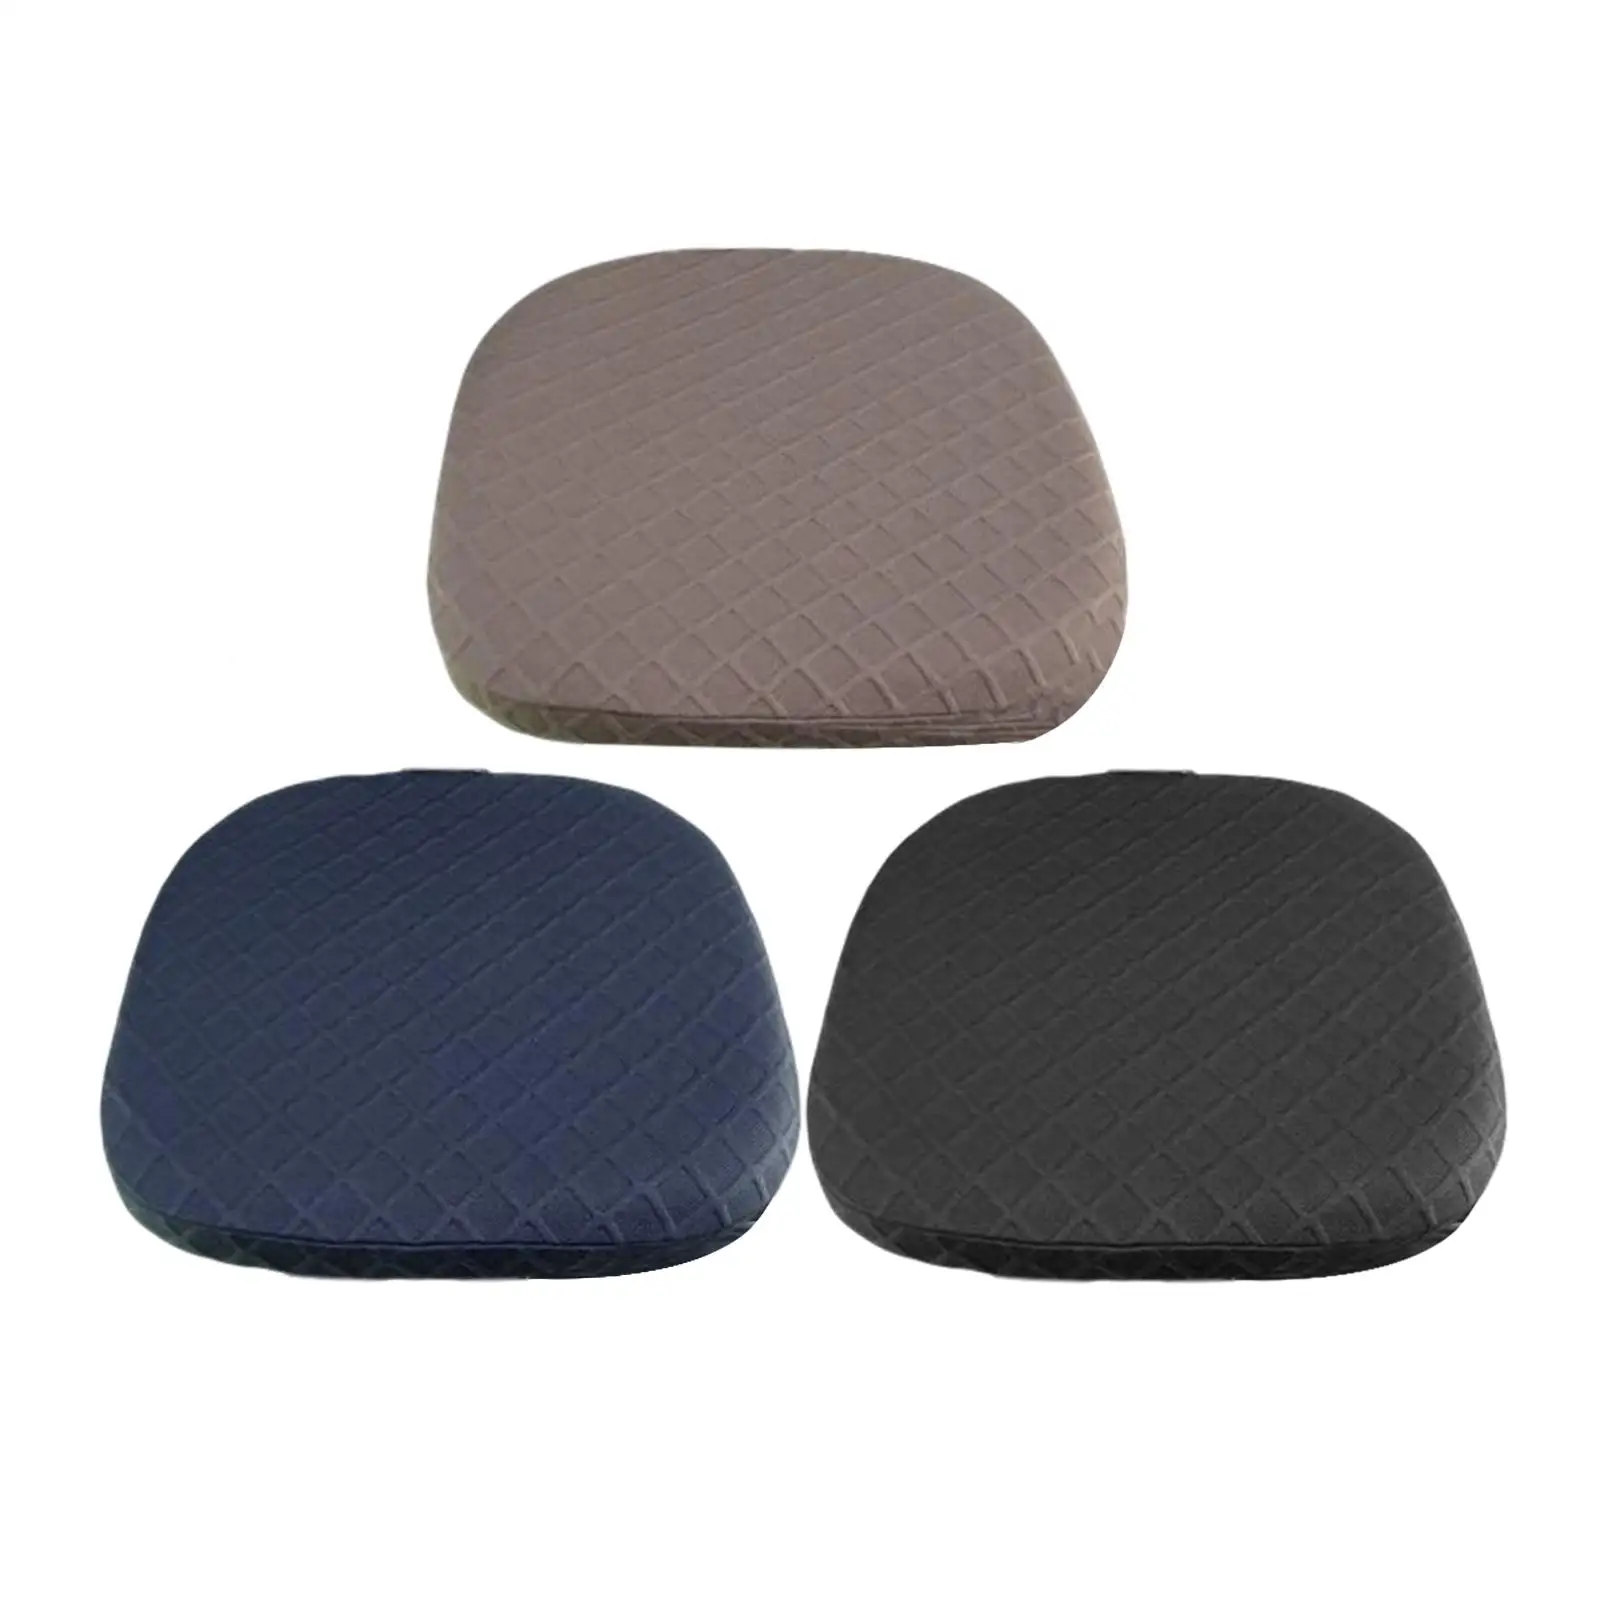 Stretchable Jacquard Computer Chair Seat Cover Anti Slip Flexible Easily Install for Square or Round Seat Cushions Solid Pattern